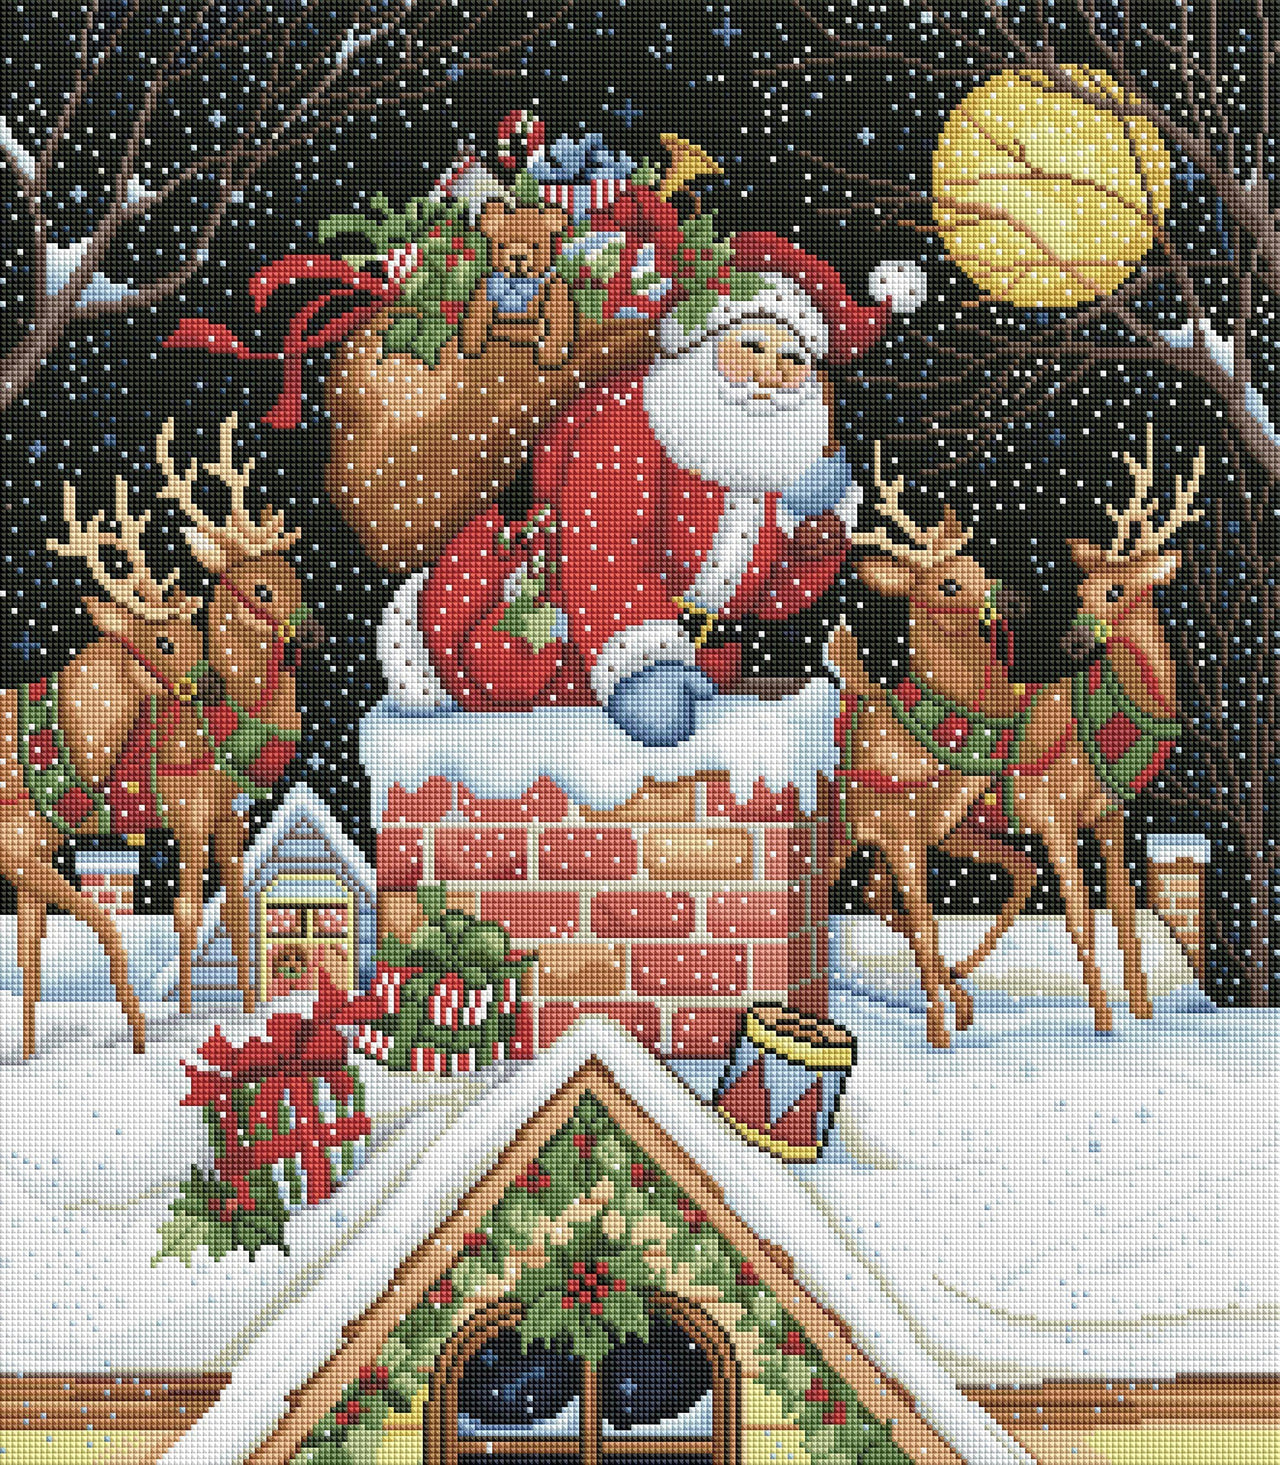 Diamond Painting Santa In Chimney 22" x 25″ (58cm x 64cm) / Square with 49 Colors including 4 ABs